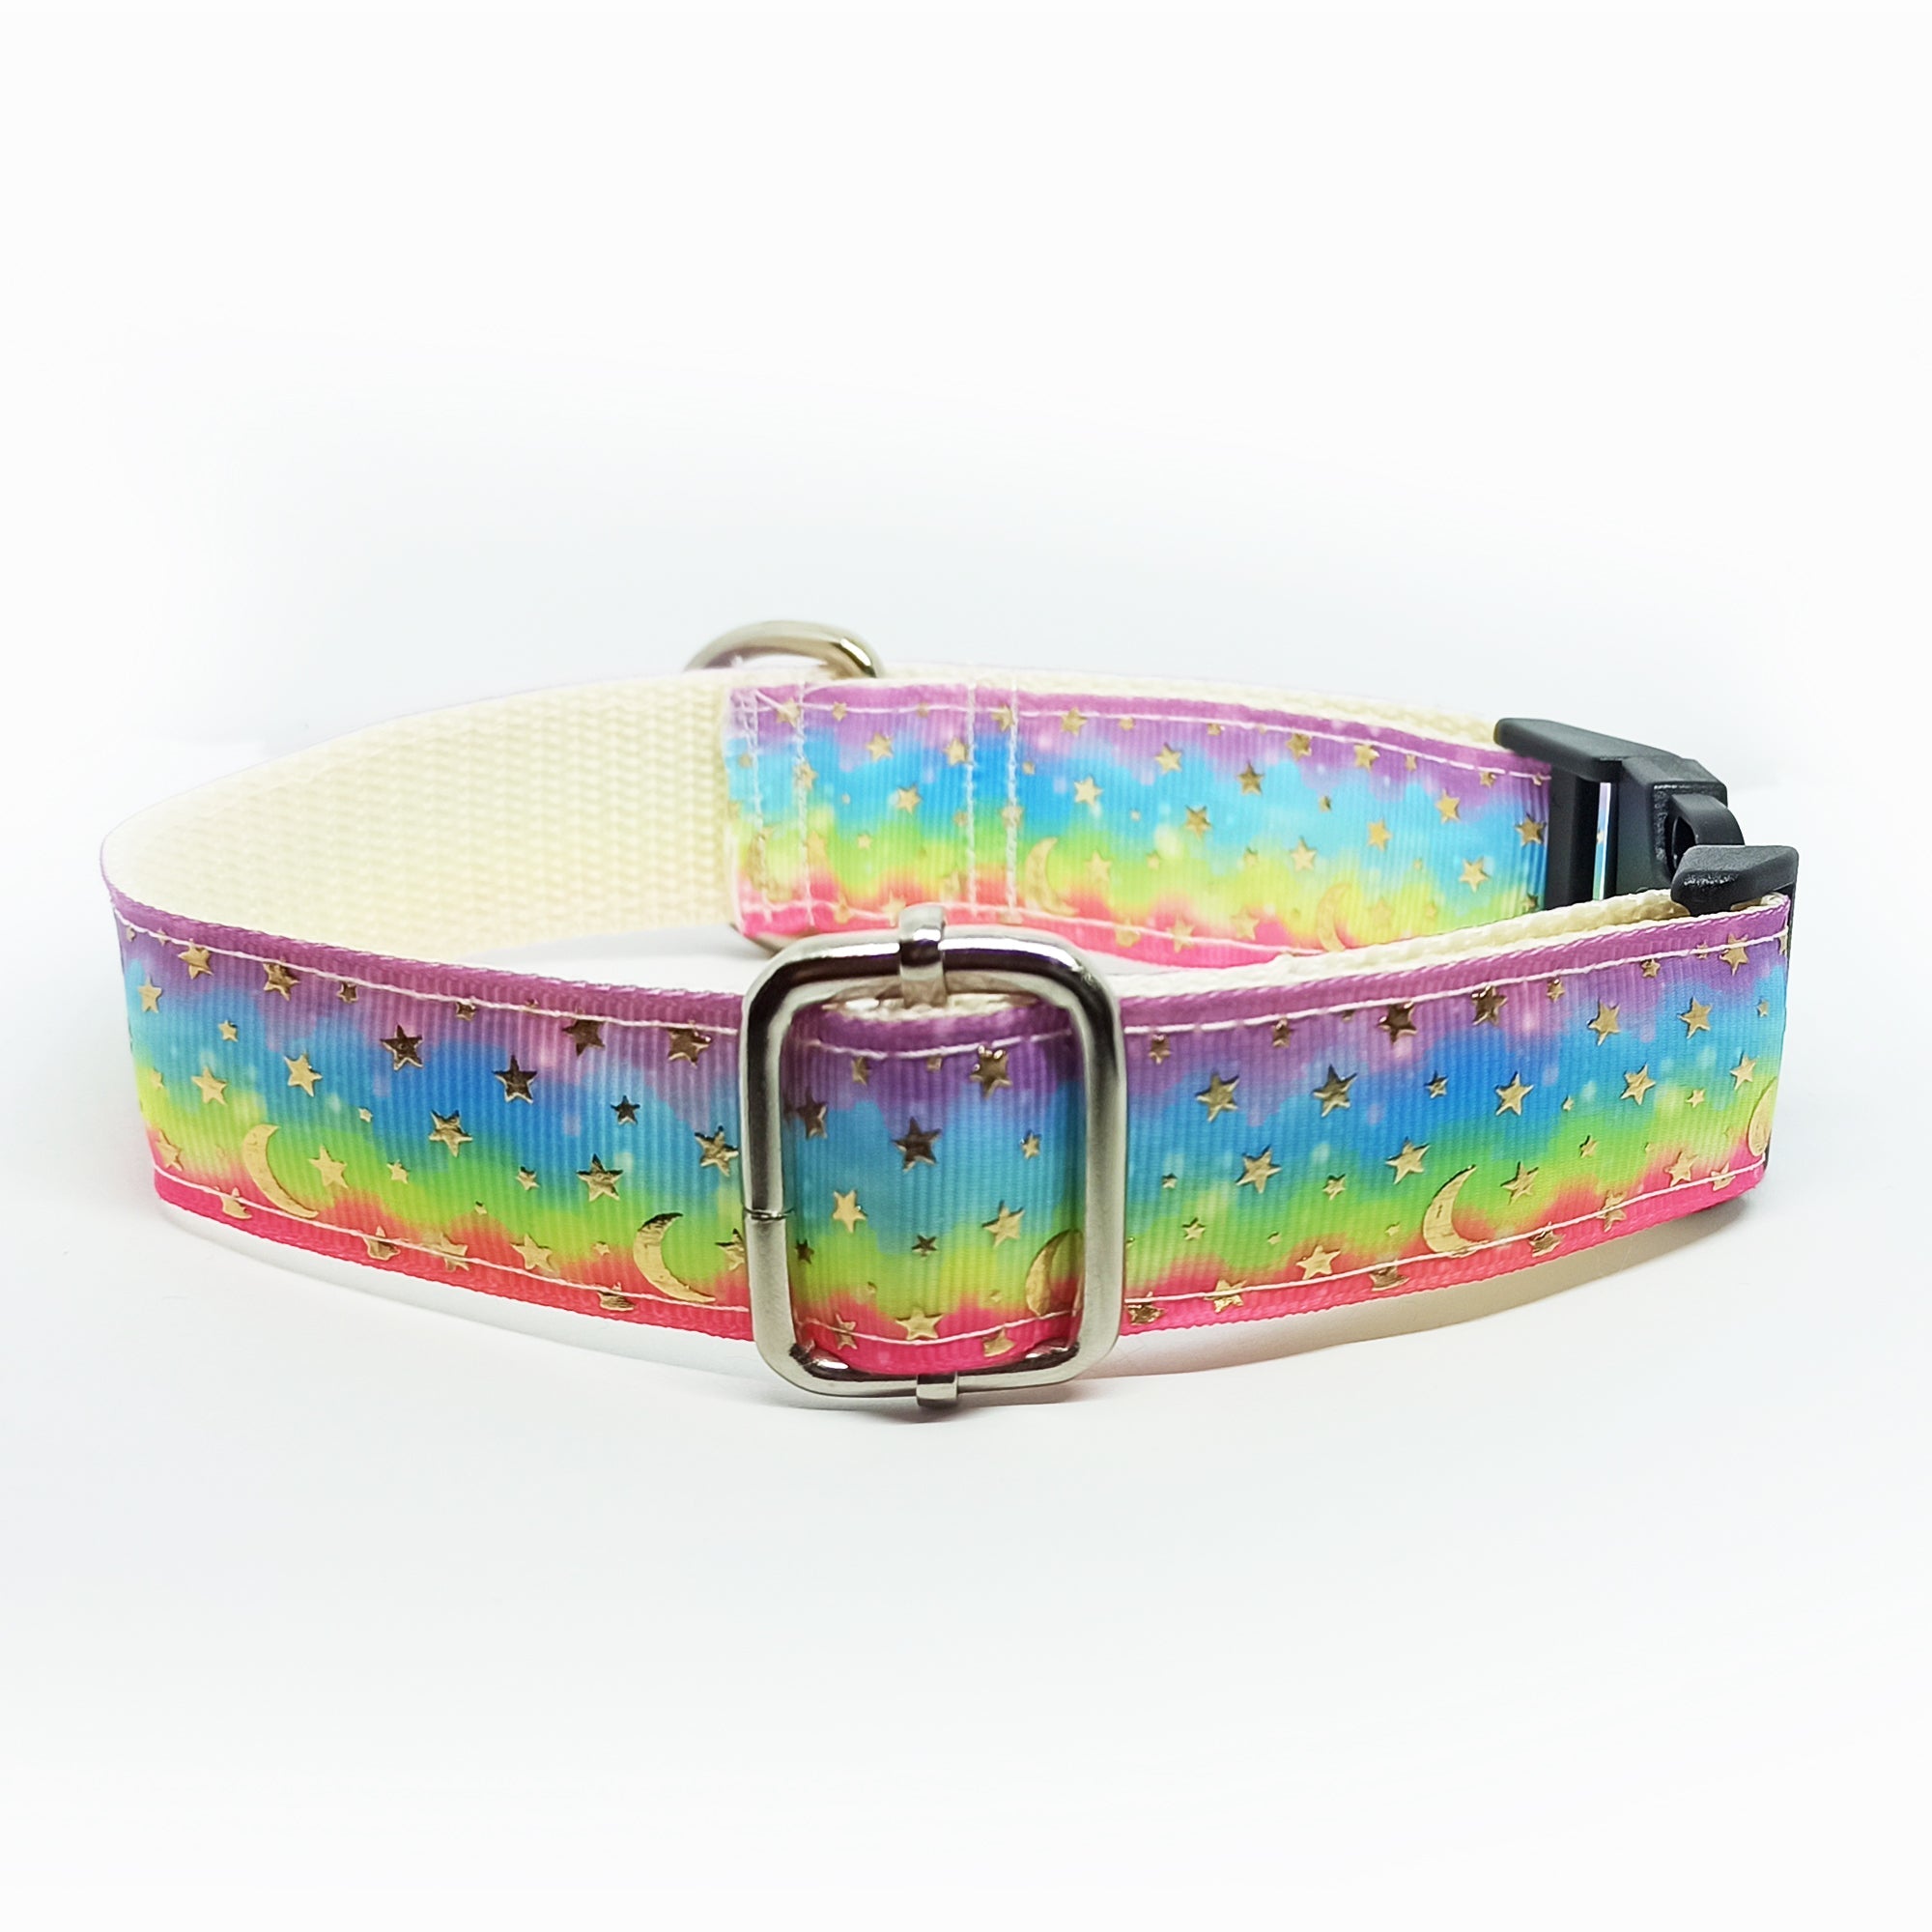 Rainbow with Golden Moon Stars Dog Collar - S-L sizes with custom matching pet tag - Adventures of Rubi